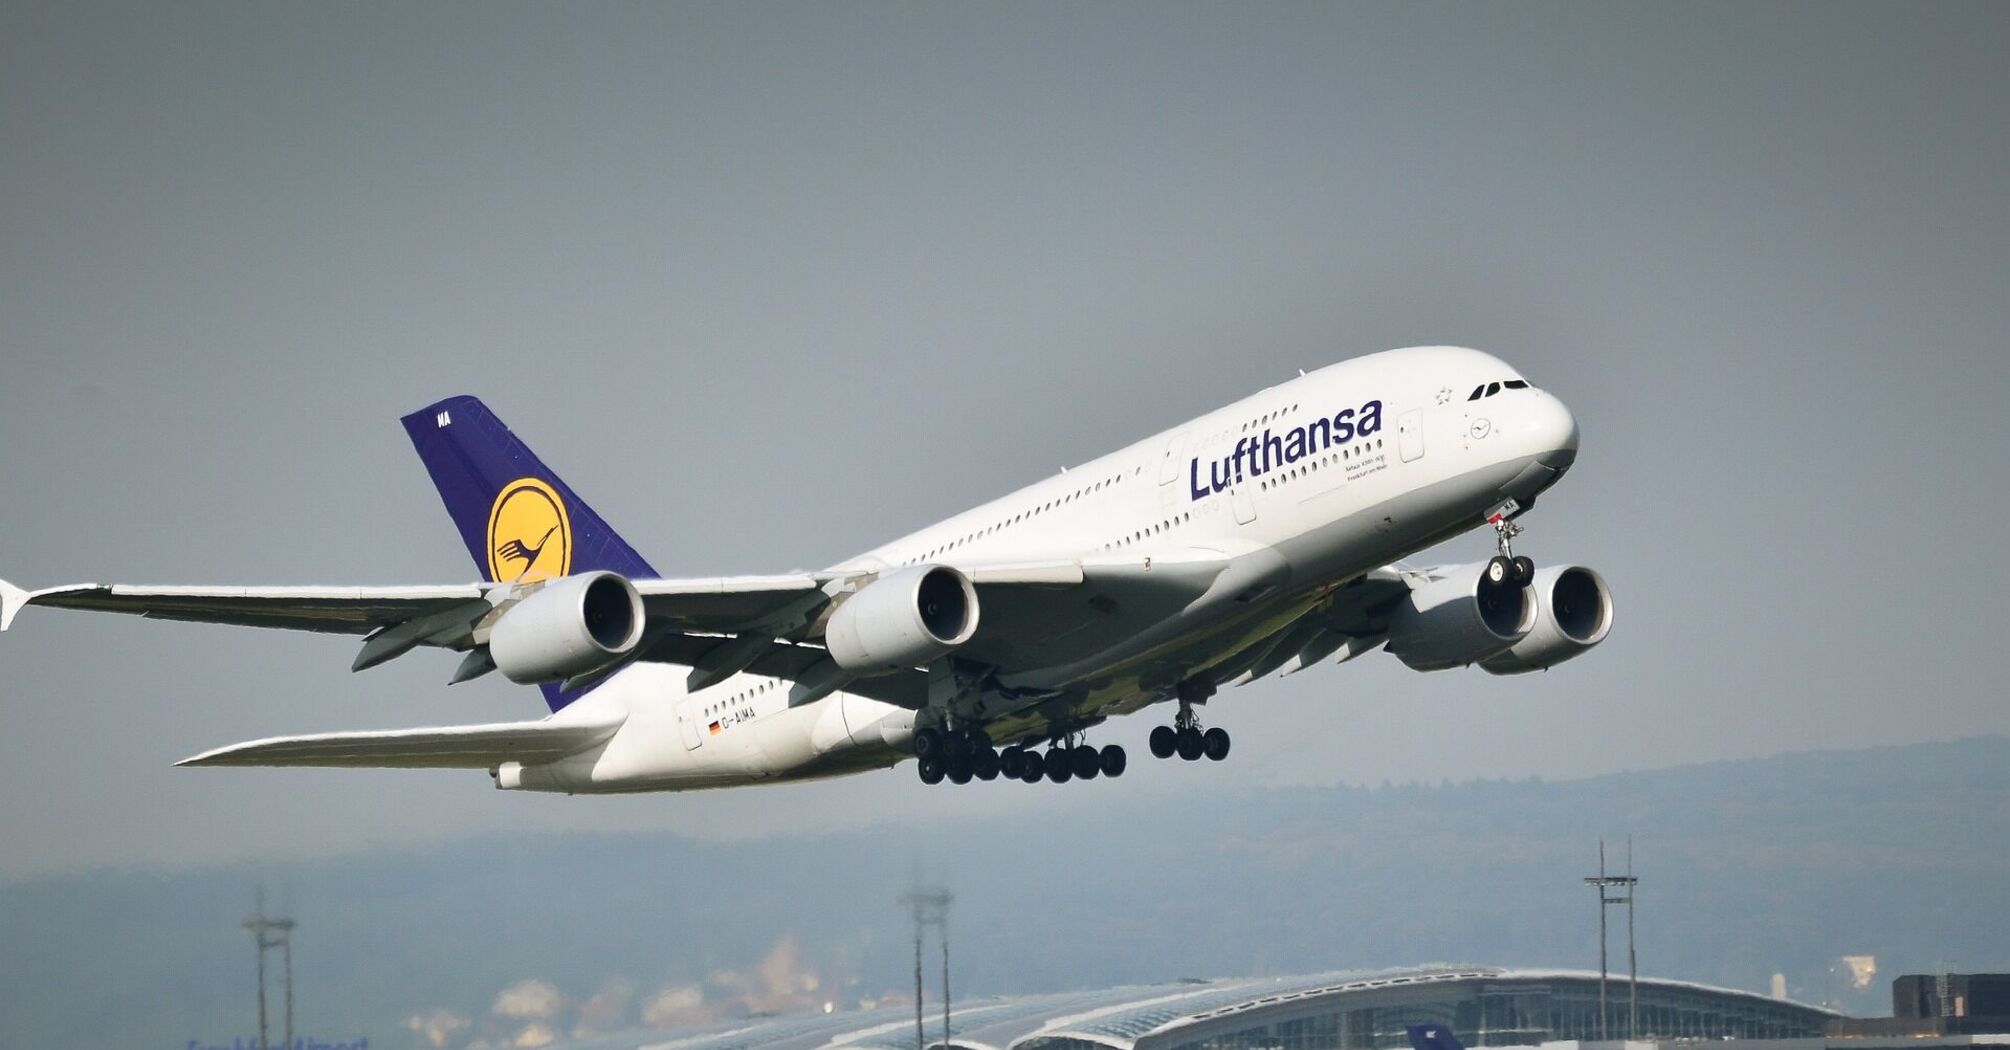 Lufthansa Airbus A380 aircraft in mid-flight approaching Frankfurt Airport